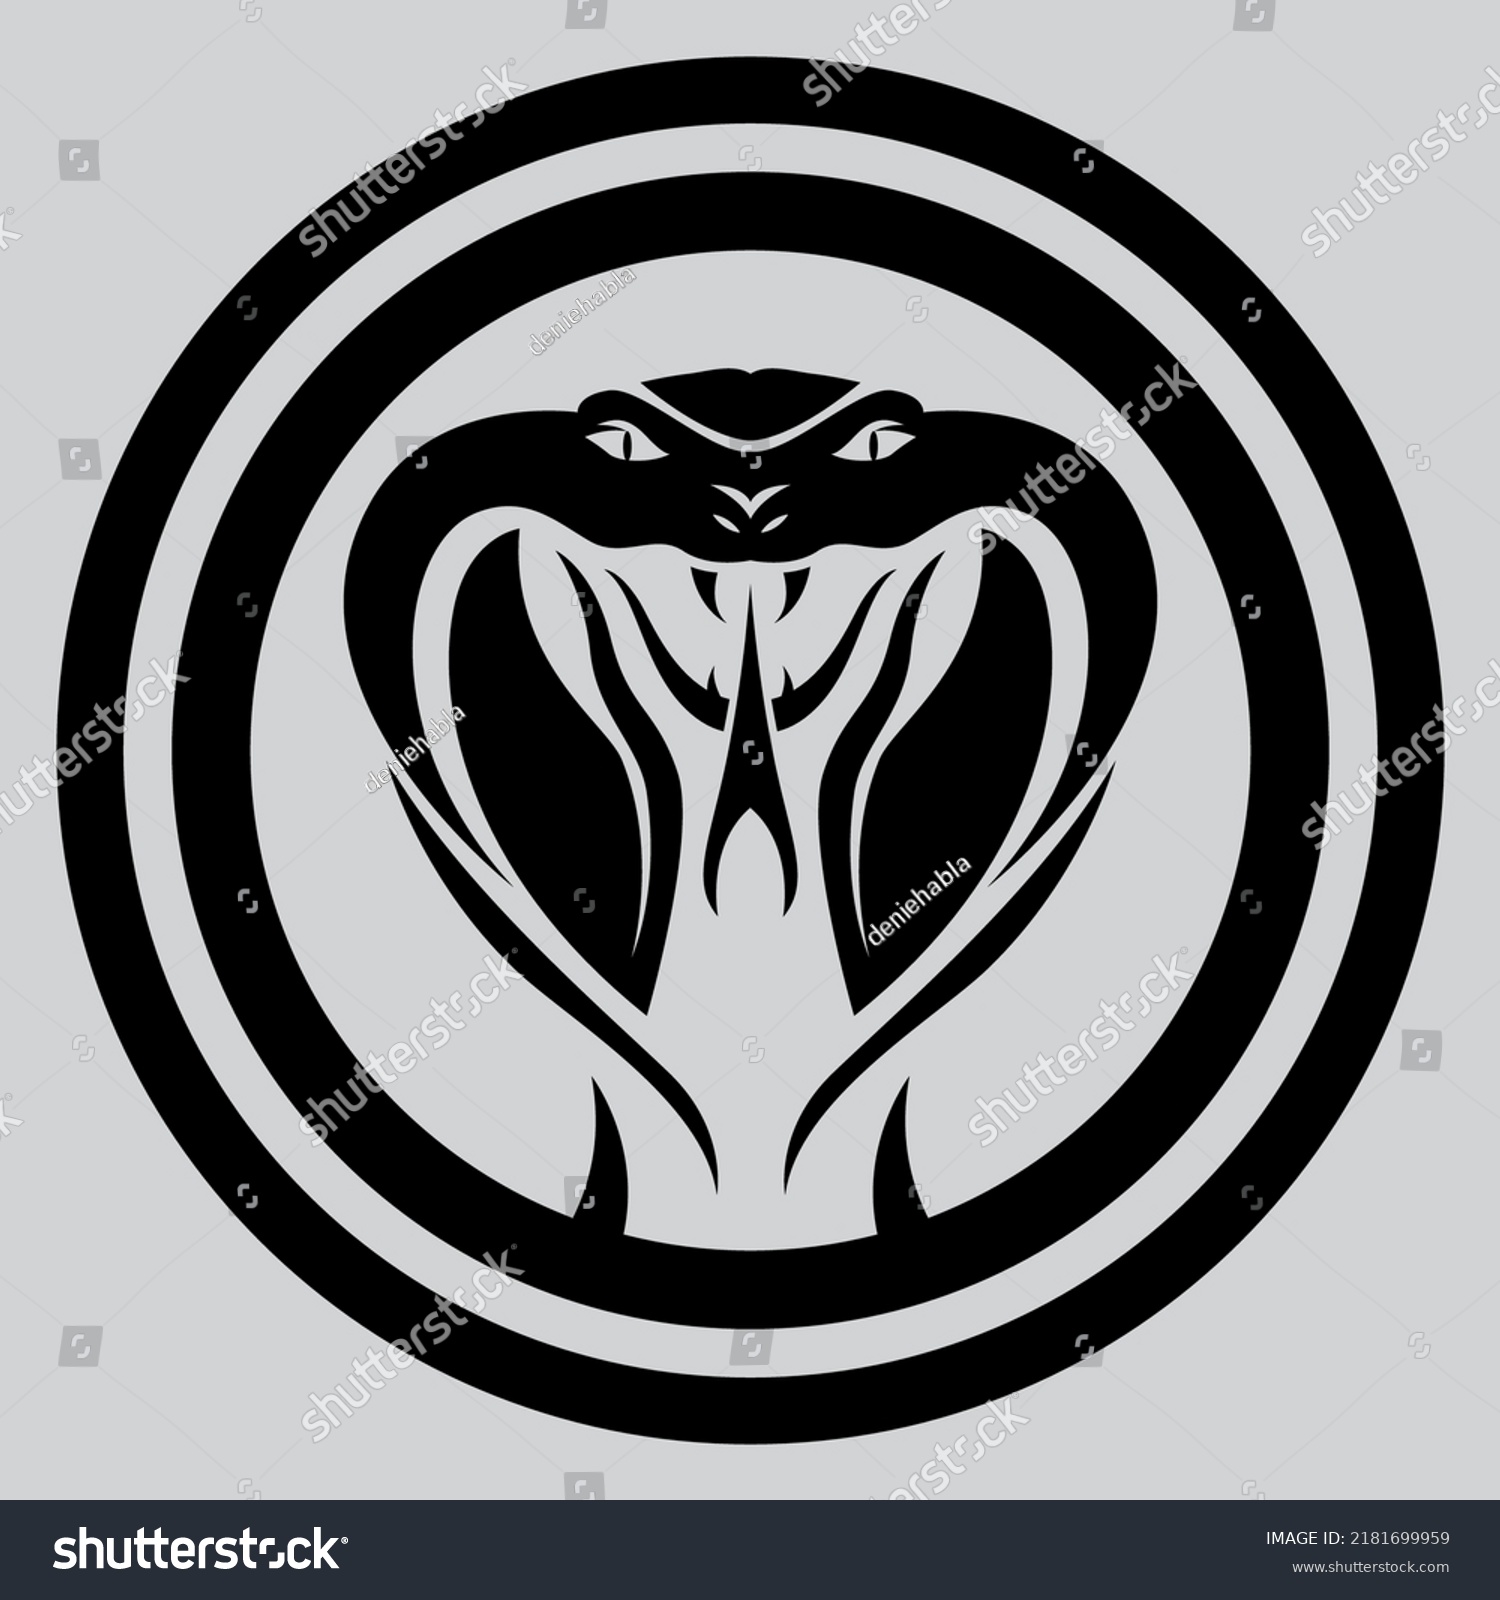 SVG of Snake head icon or logo in a circle for company, community, tattoo, and more svg